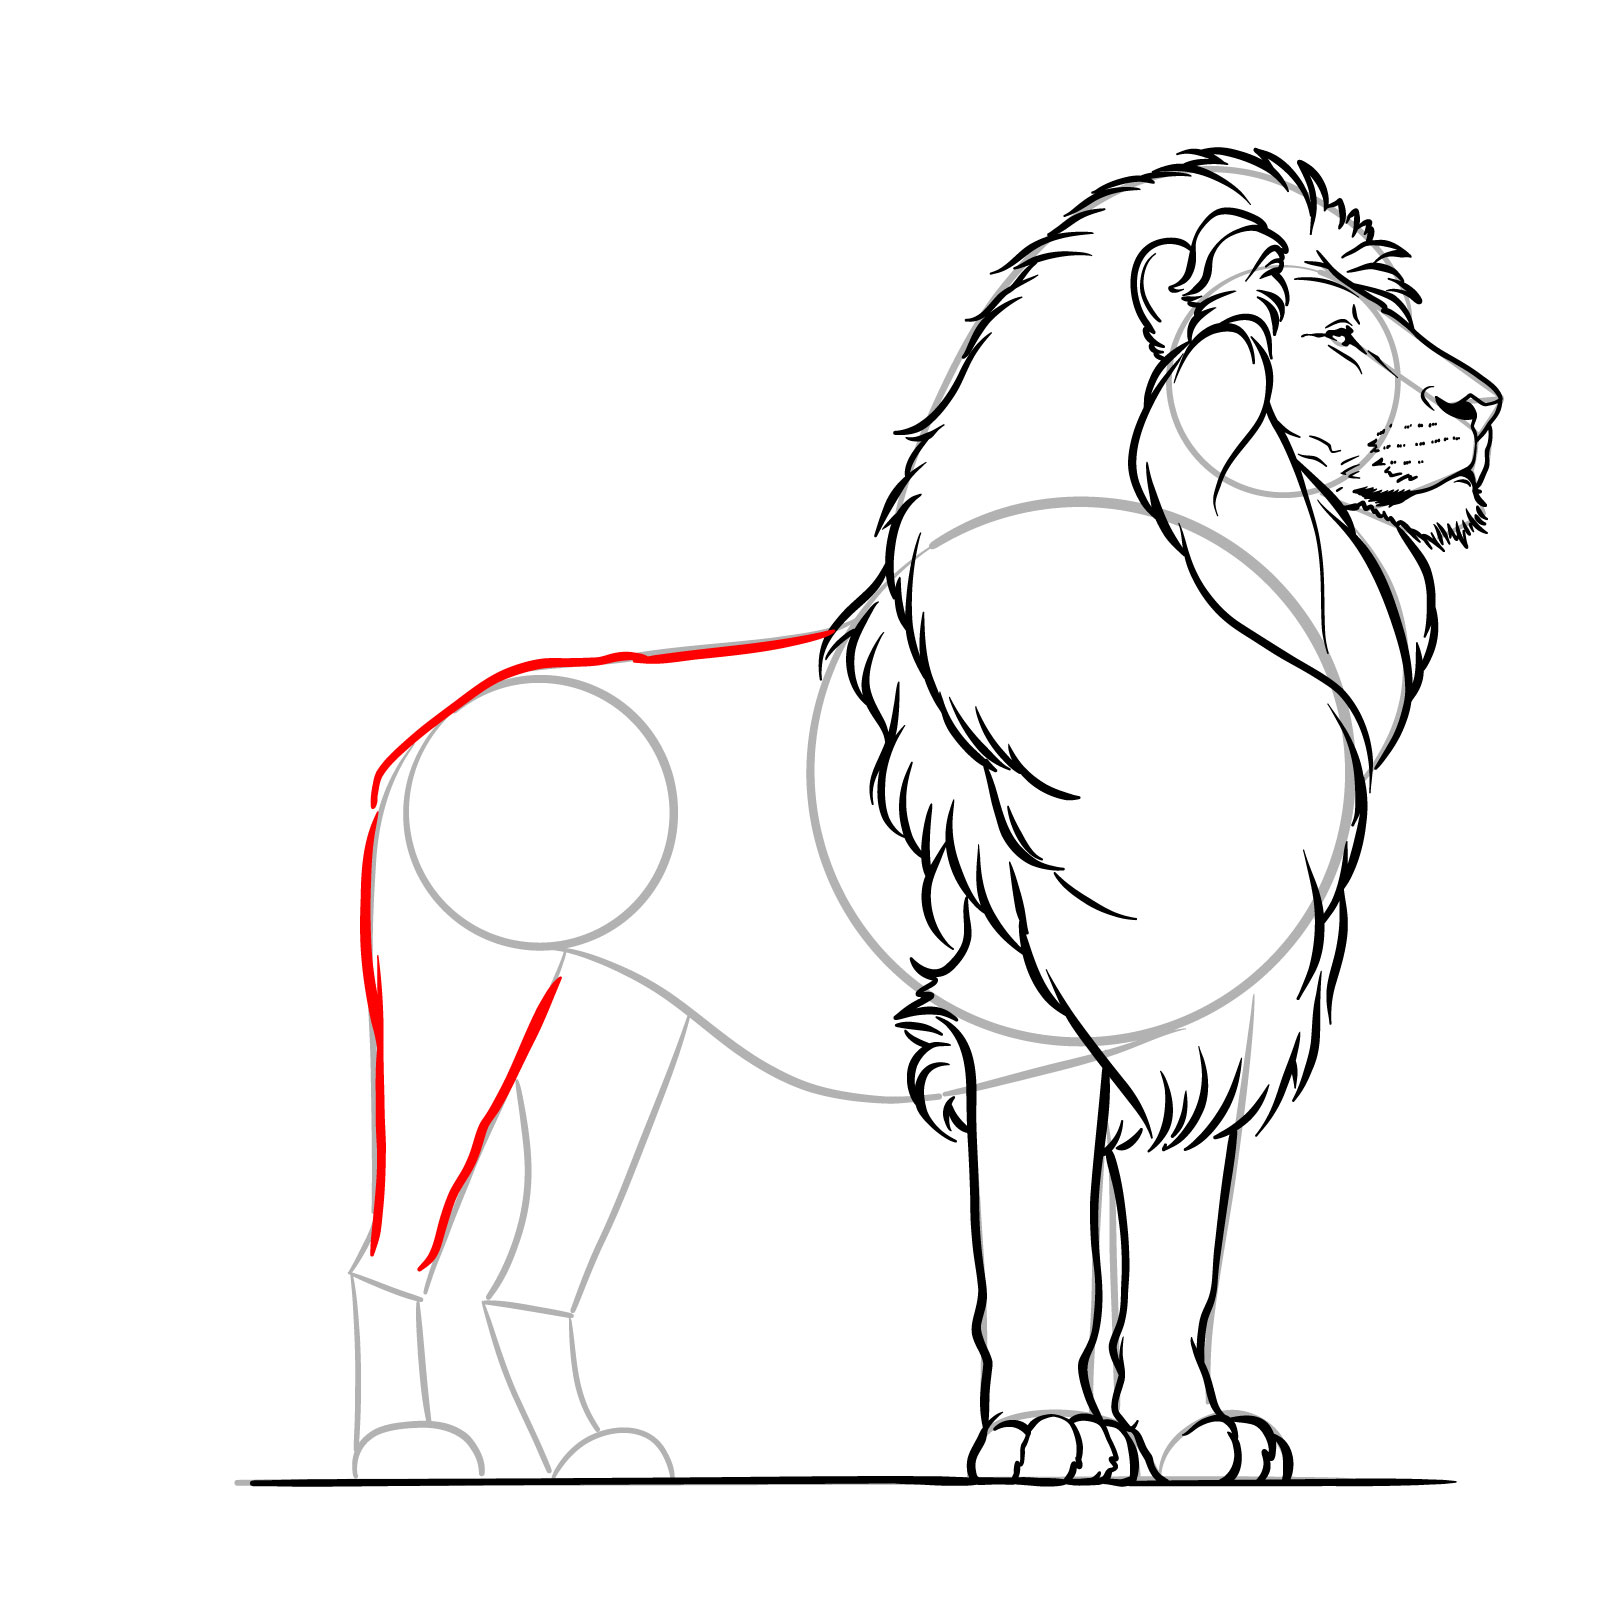 Outlining the back and part of the rear right leg of a lion - step 14